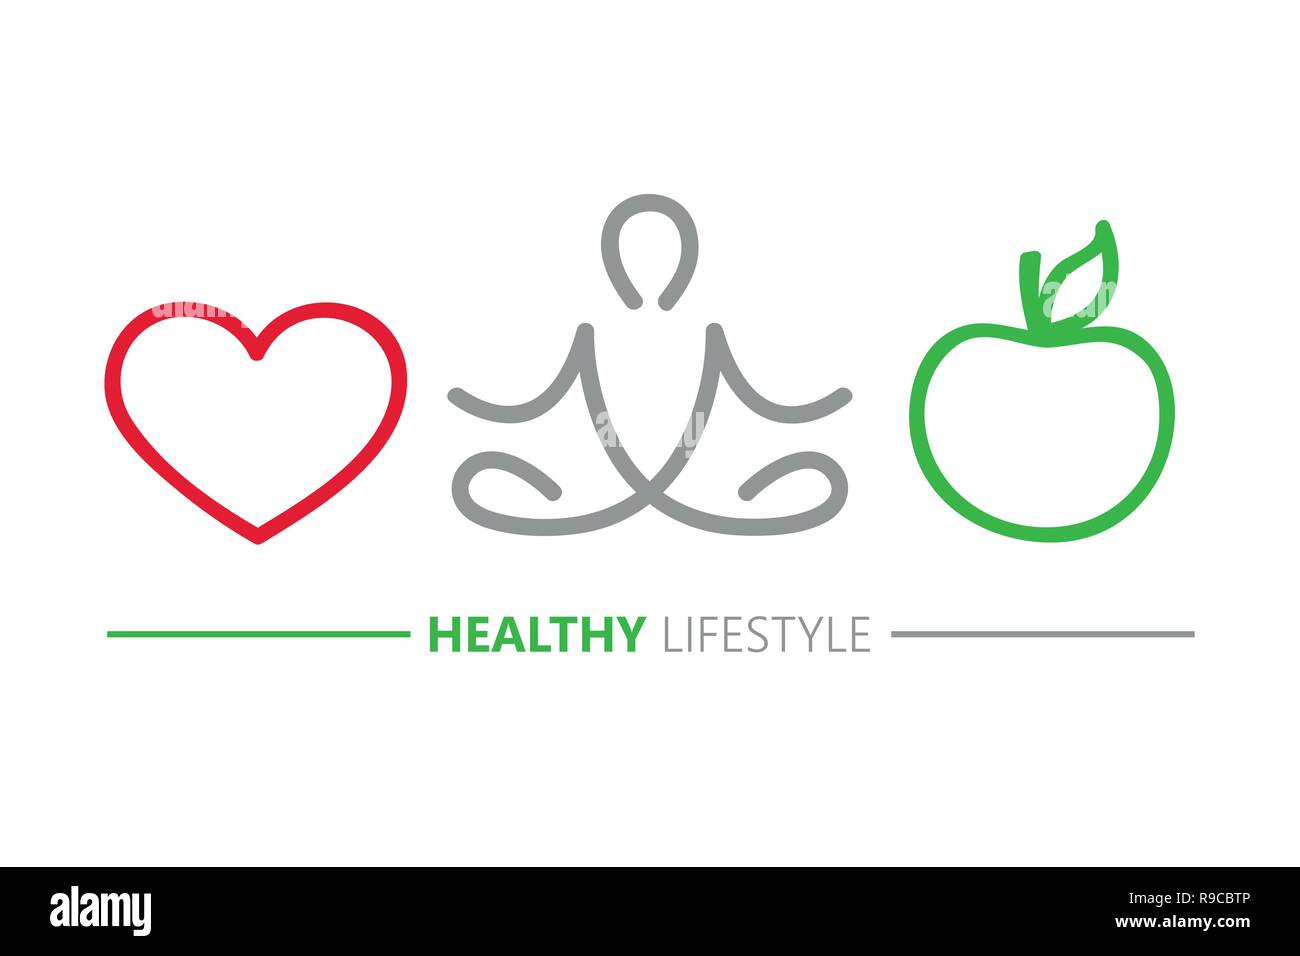 healthy lifestyle concept heart yoga and green apple vector illustration EPS10 Stock Vector